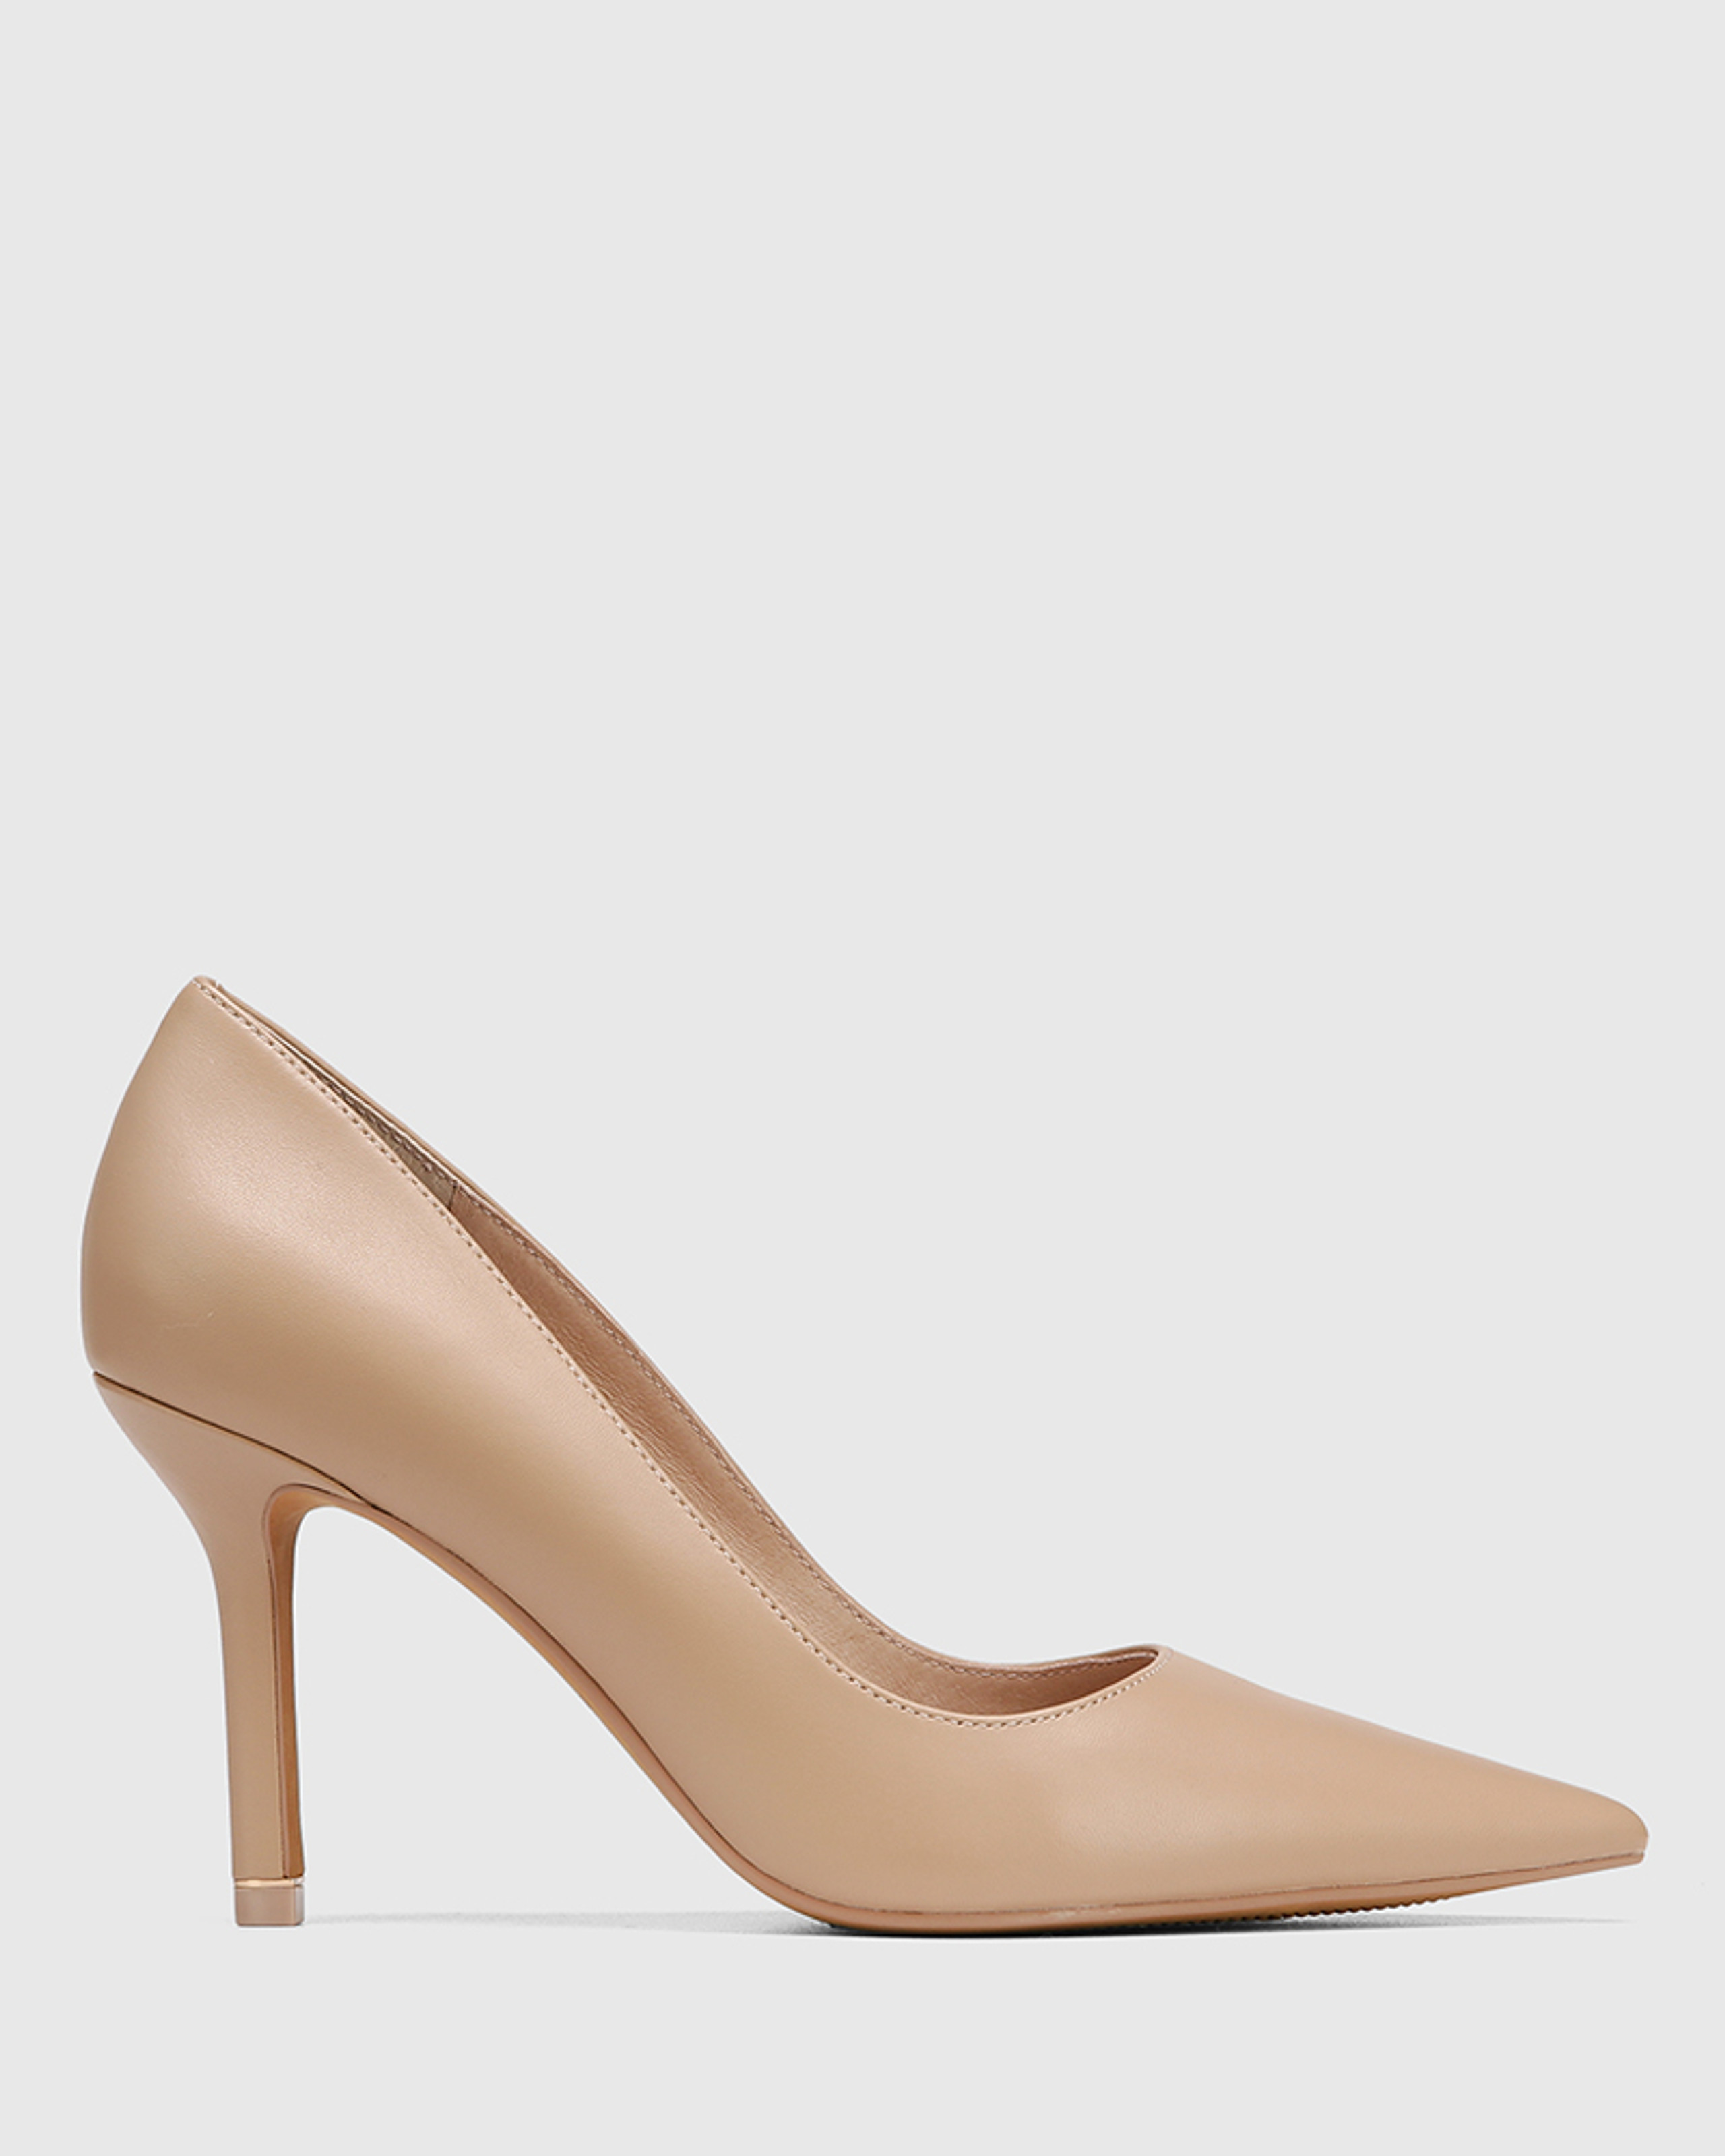 Quendra New Flesh Leather Pointed Toe Pump